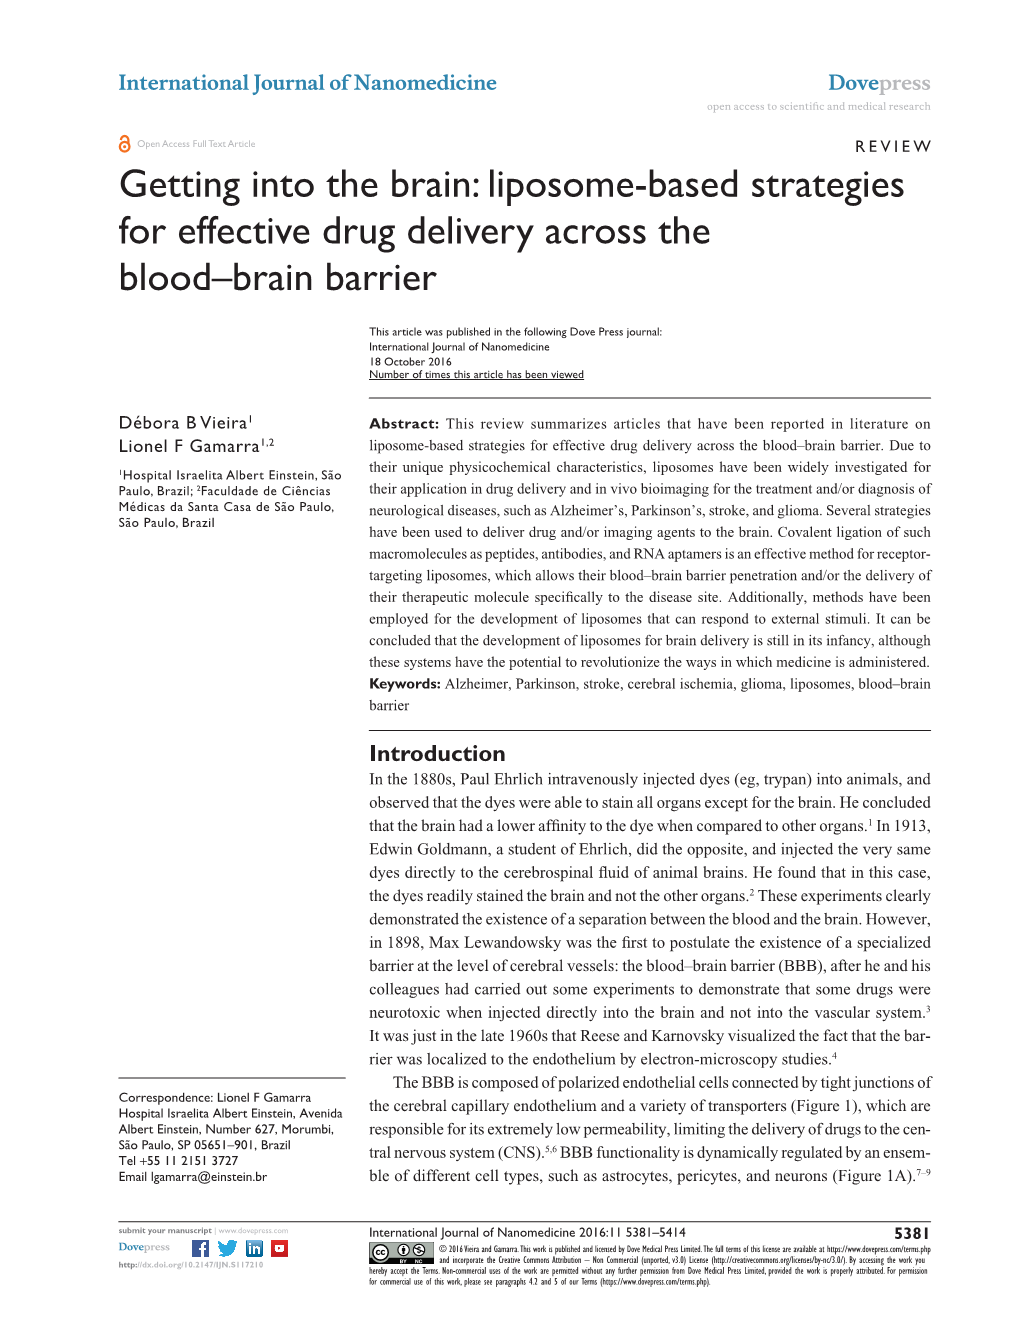 Liposome-Based Strategies for Effective Drug Delivery Across the Blood–Brain Barrier